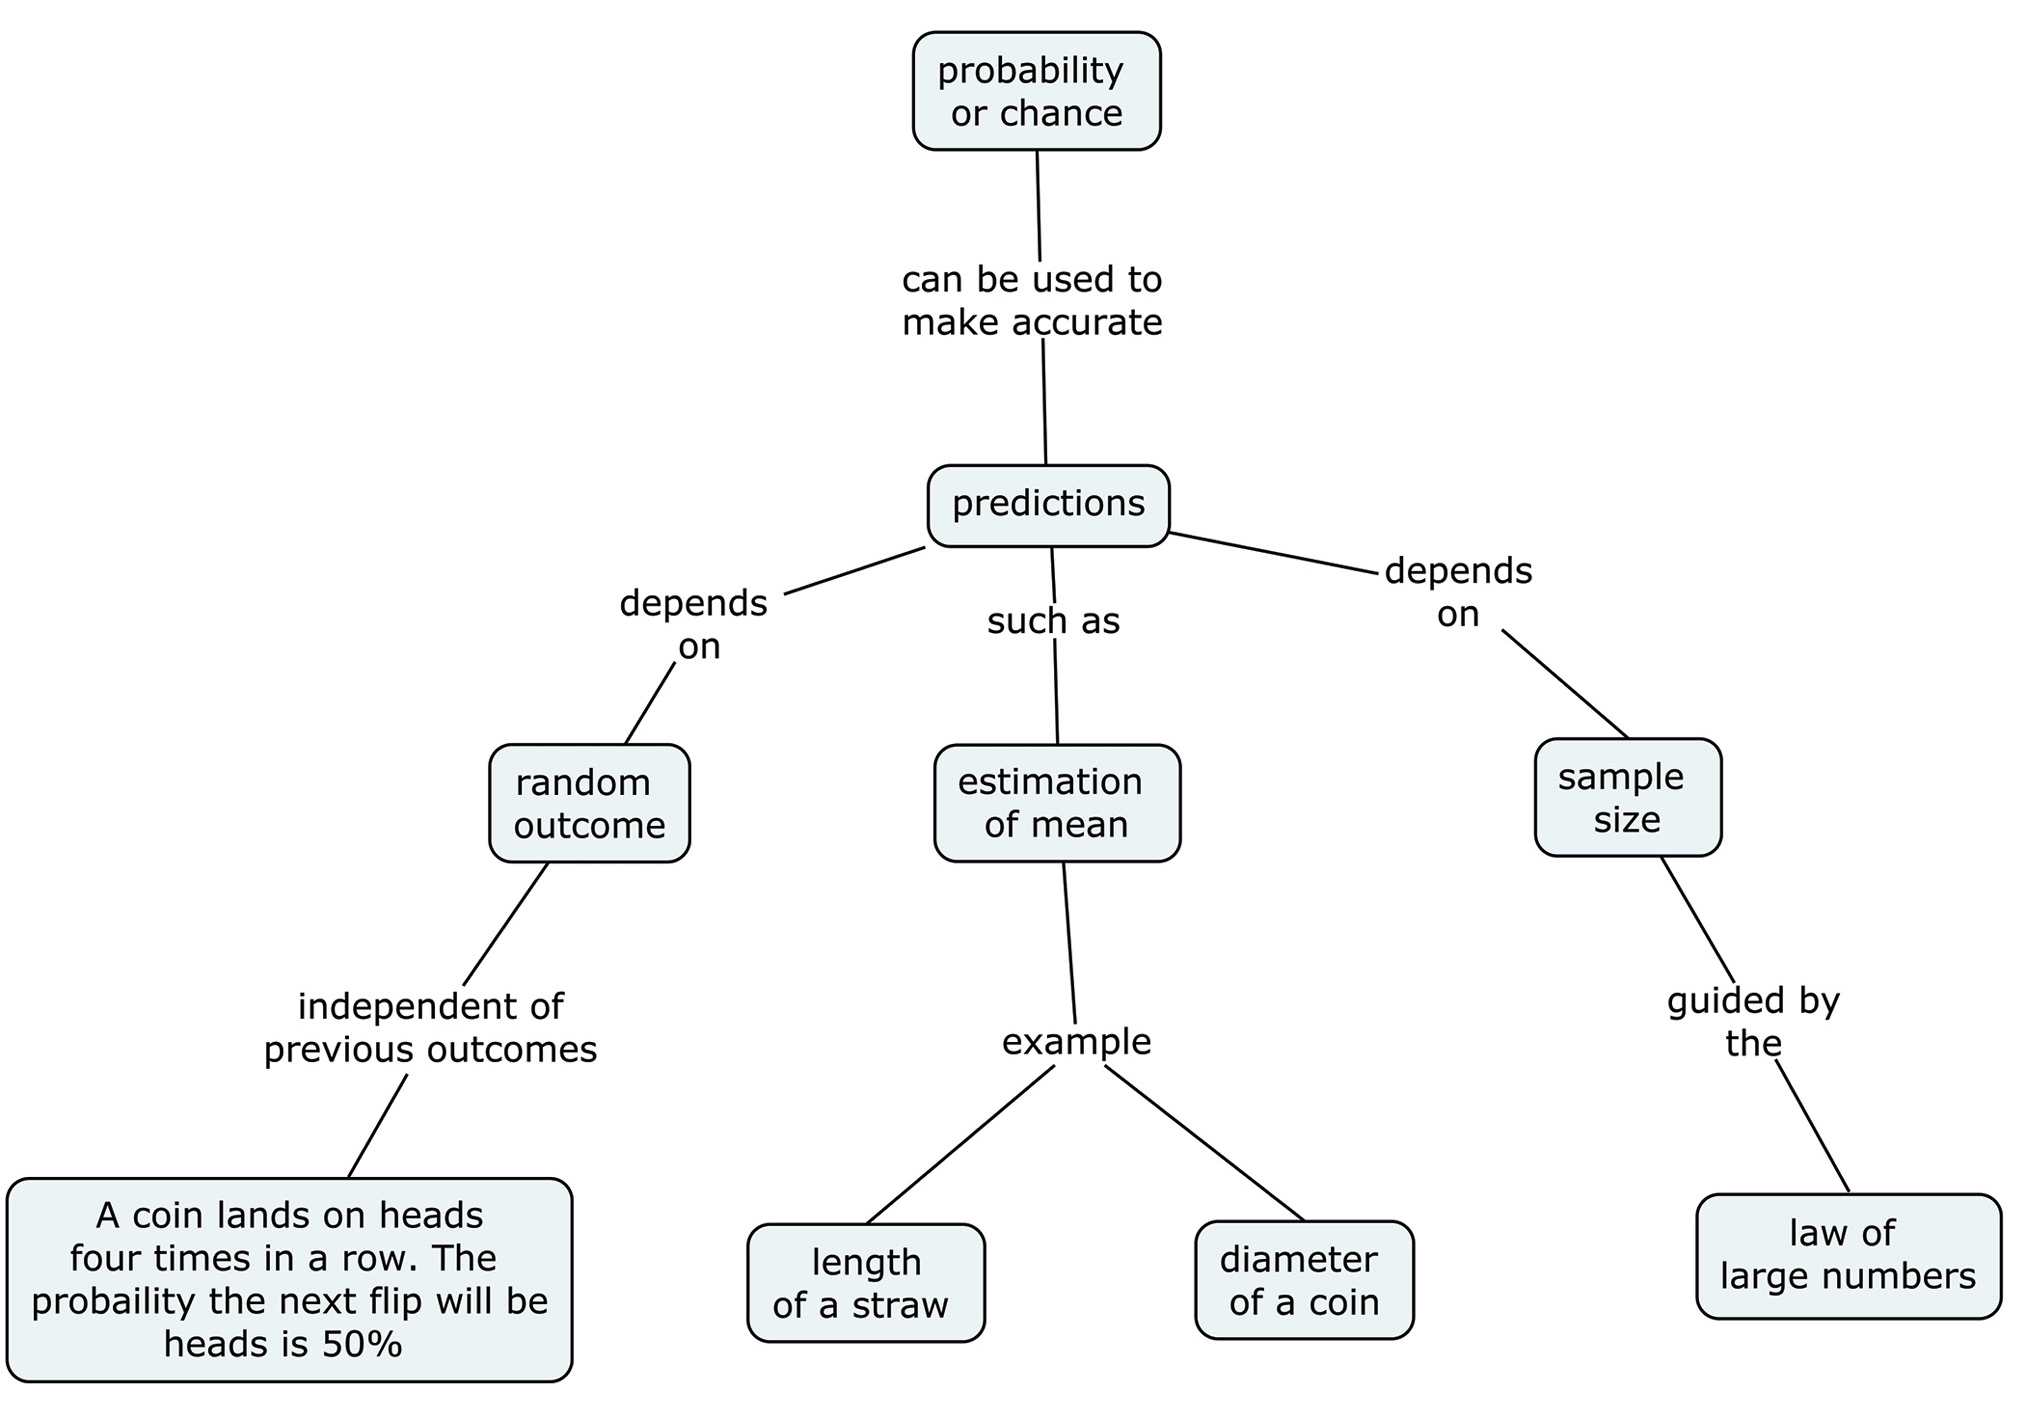 Criterion concept map on probability.